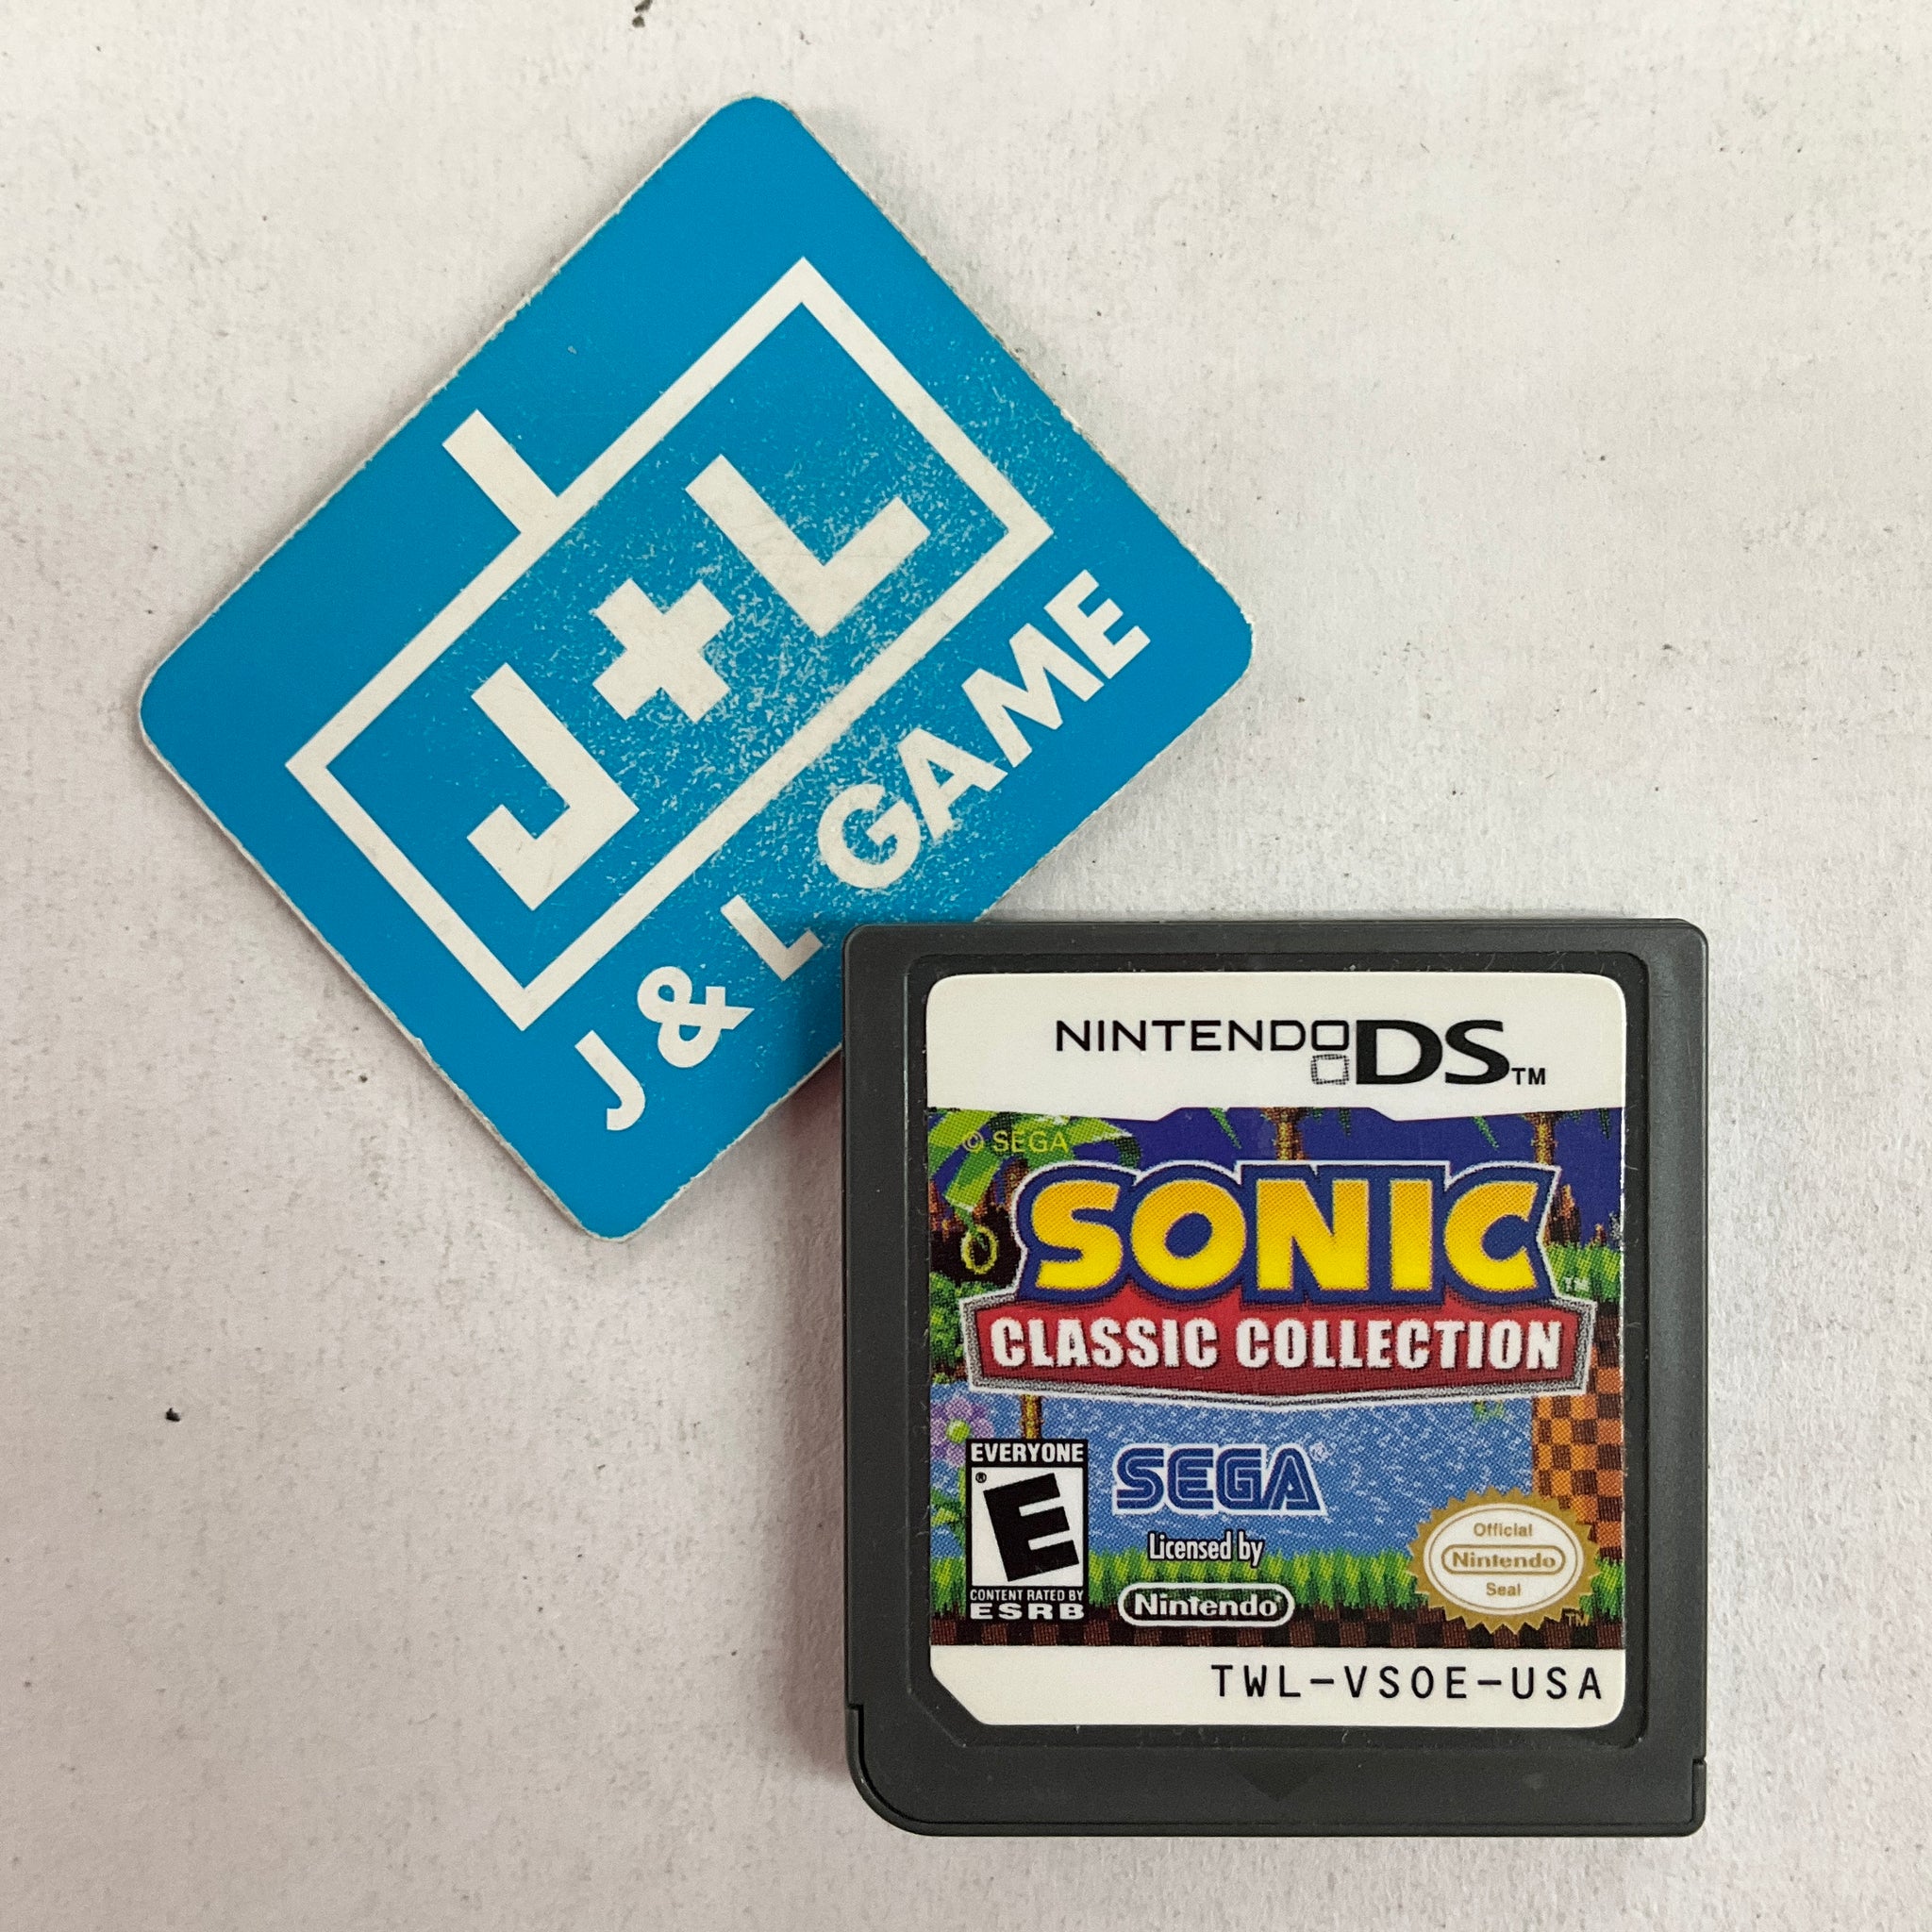 Sonic Classic Collection DS